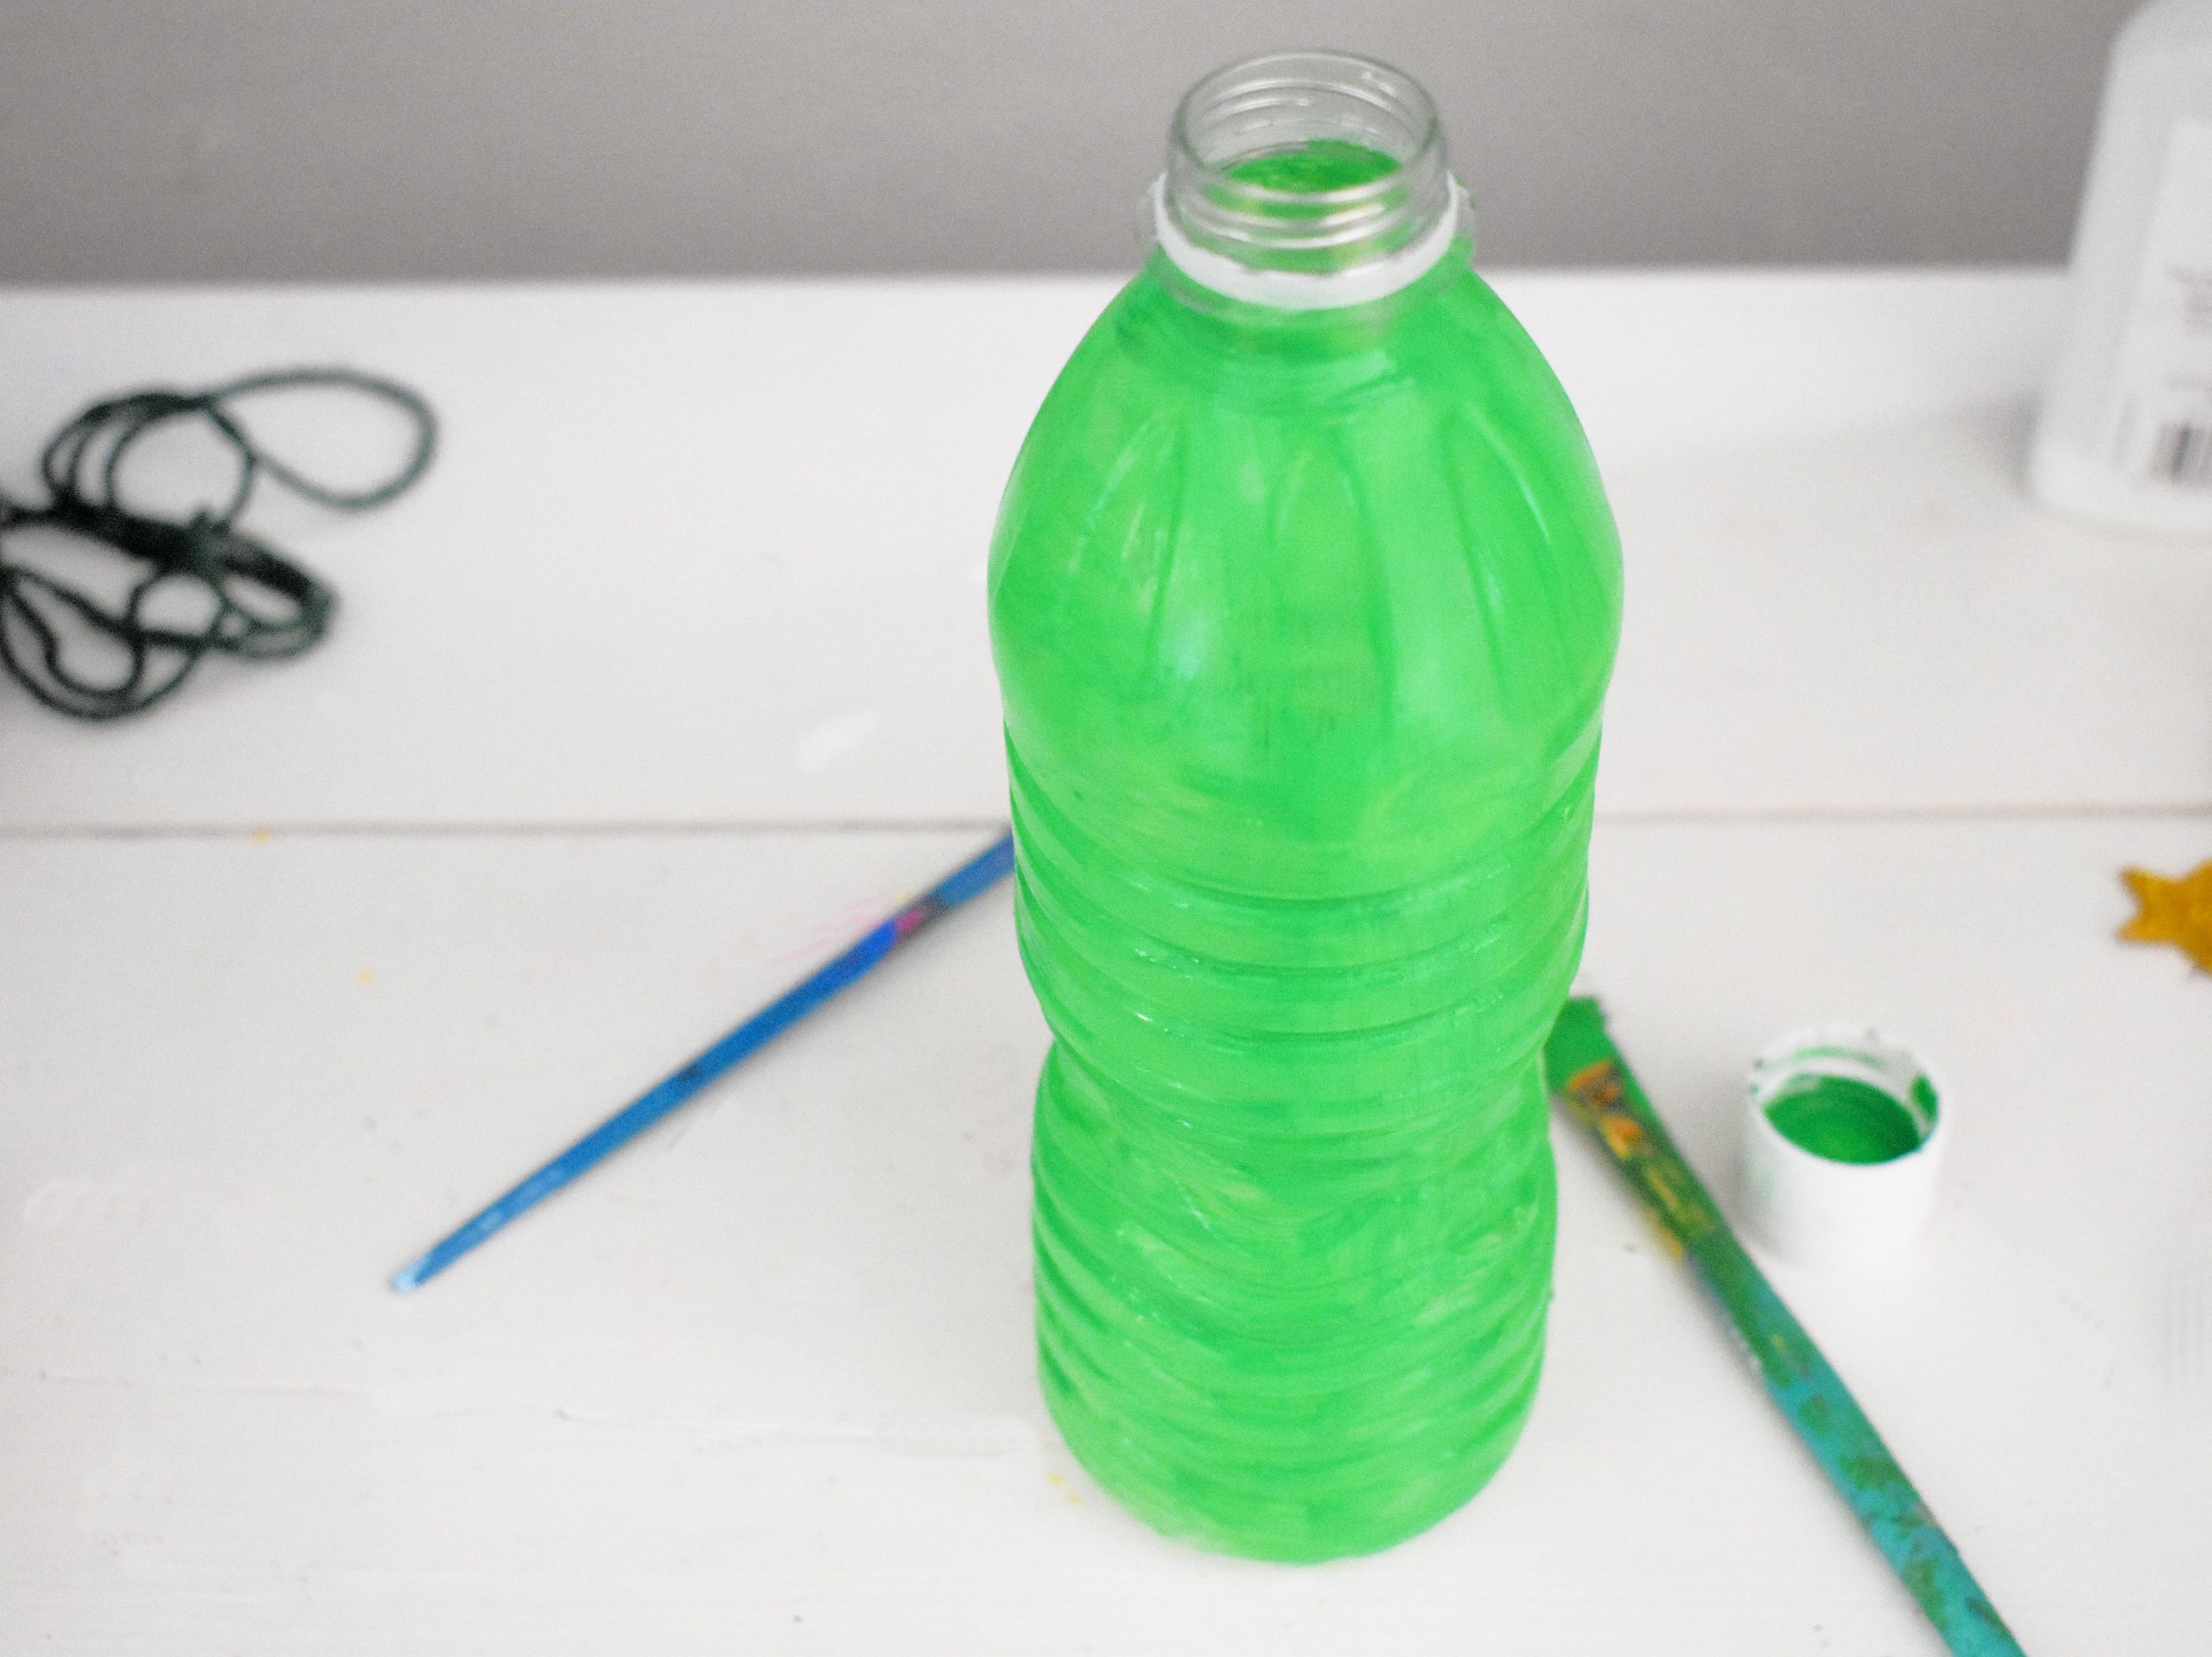 https://www.easy-crafts-for-kids.com/wp-content/uploads/2020/12/water-bottle-christmas-tree-paint-green-scaled.jpg